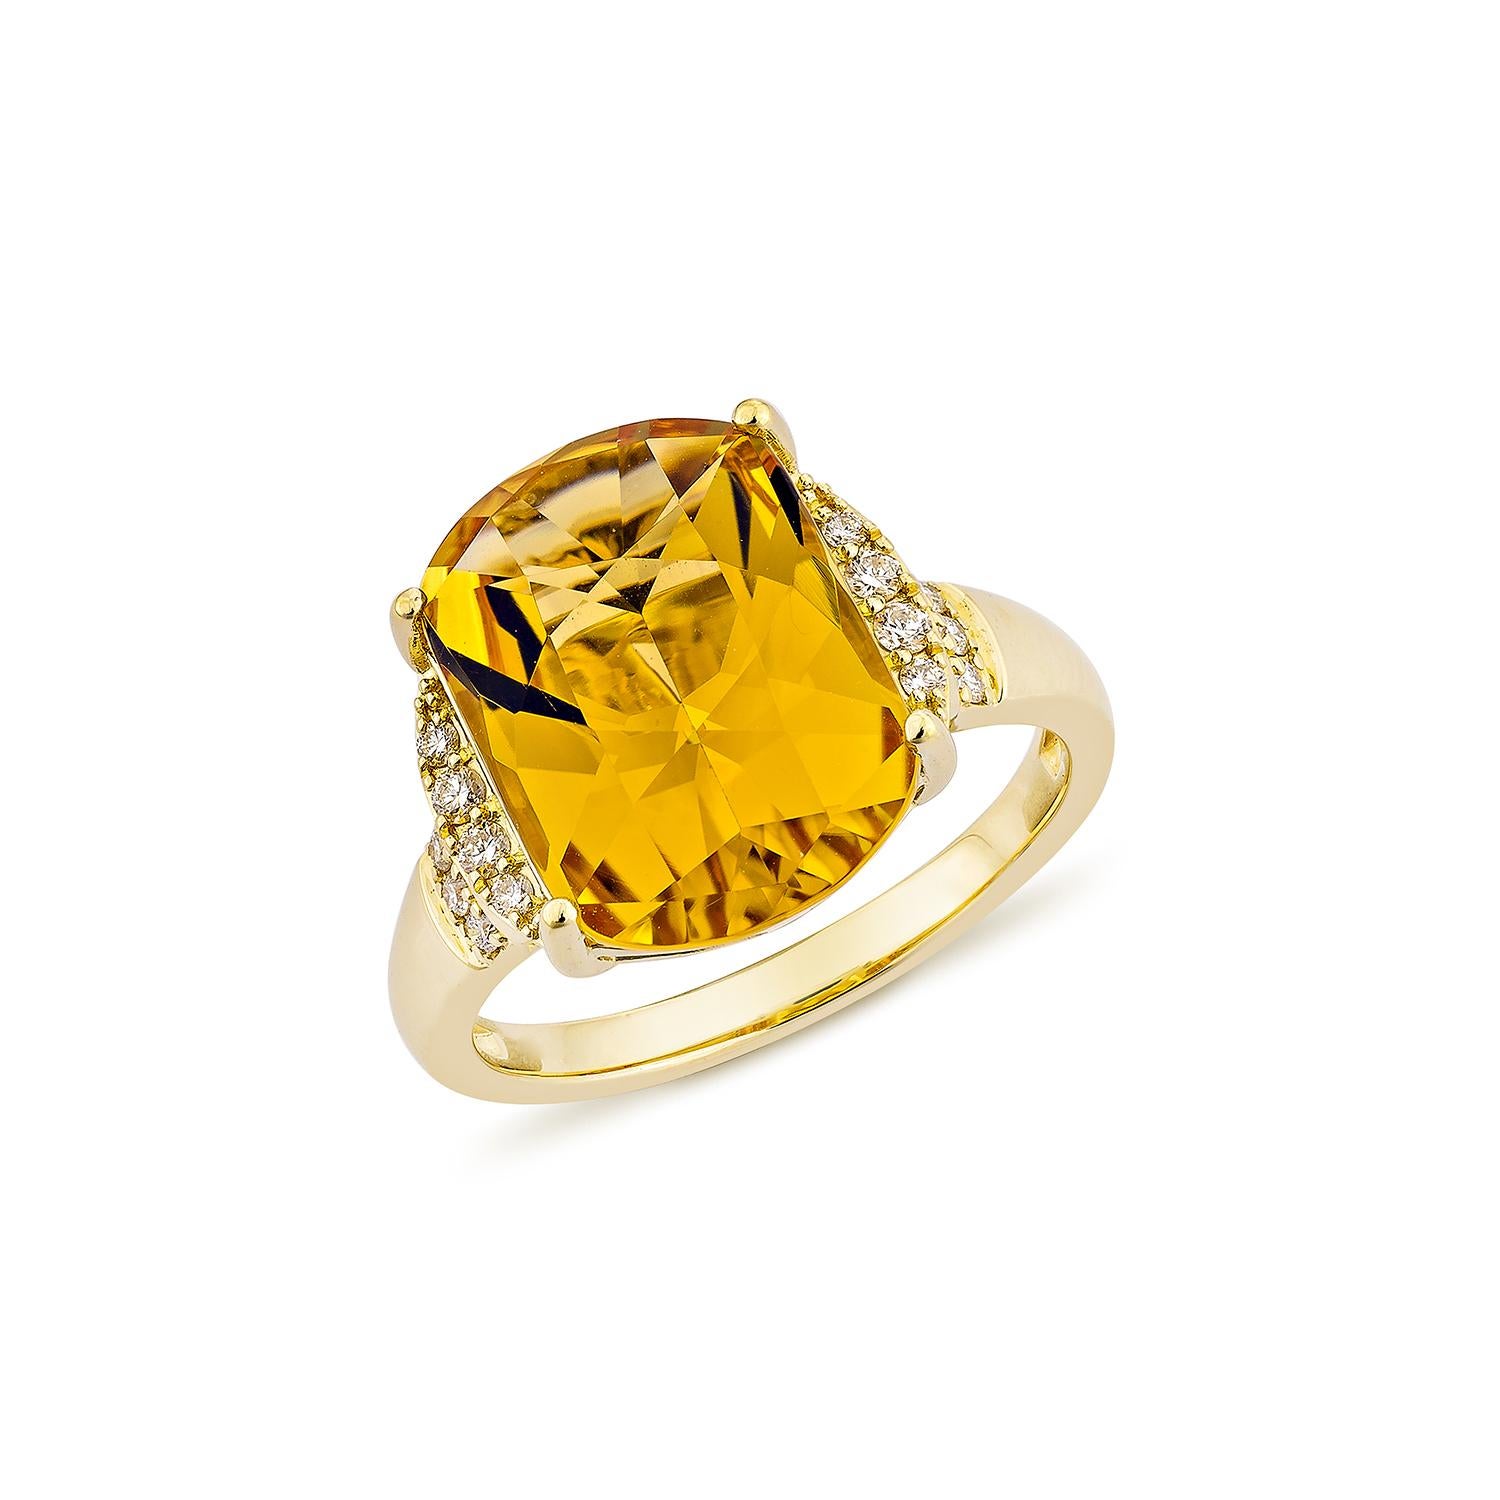 Contemporary 5.84 Carat Citrine Fancy Ring in 18Karat Yellow Gold with  White Diamond. For Sale